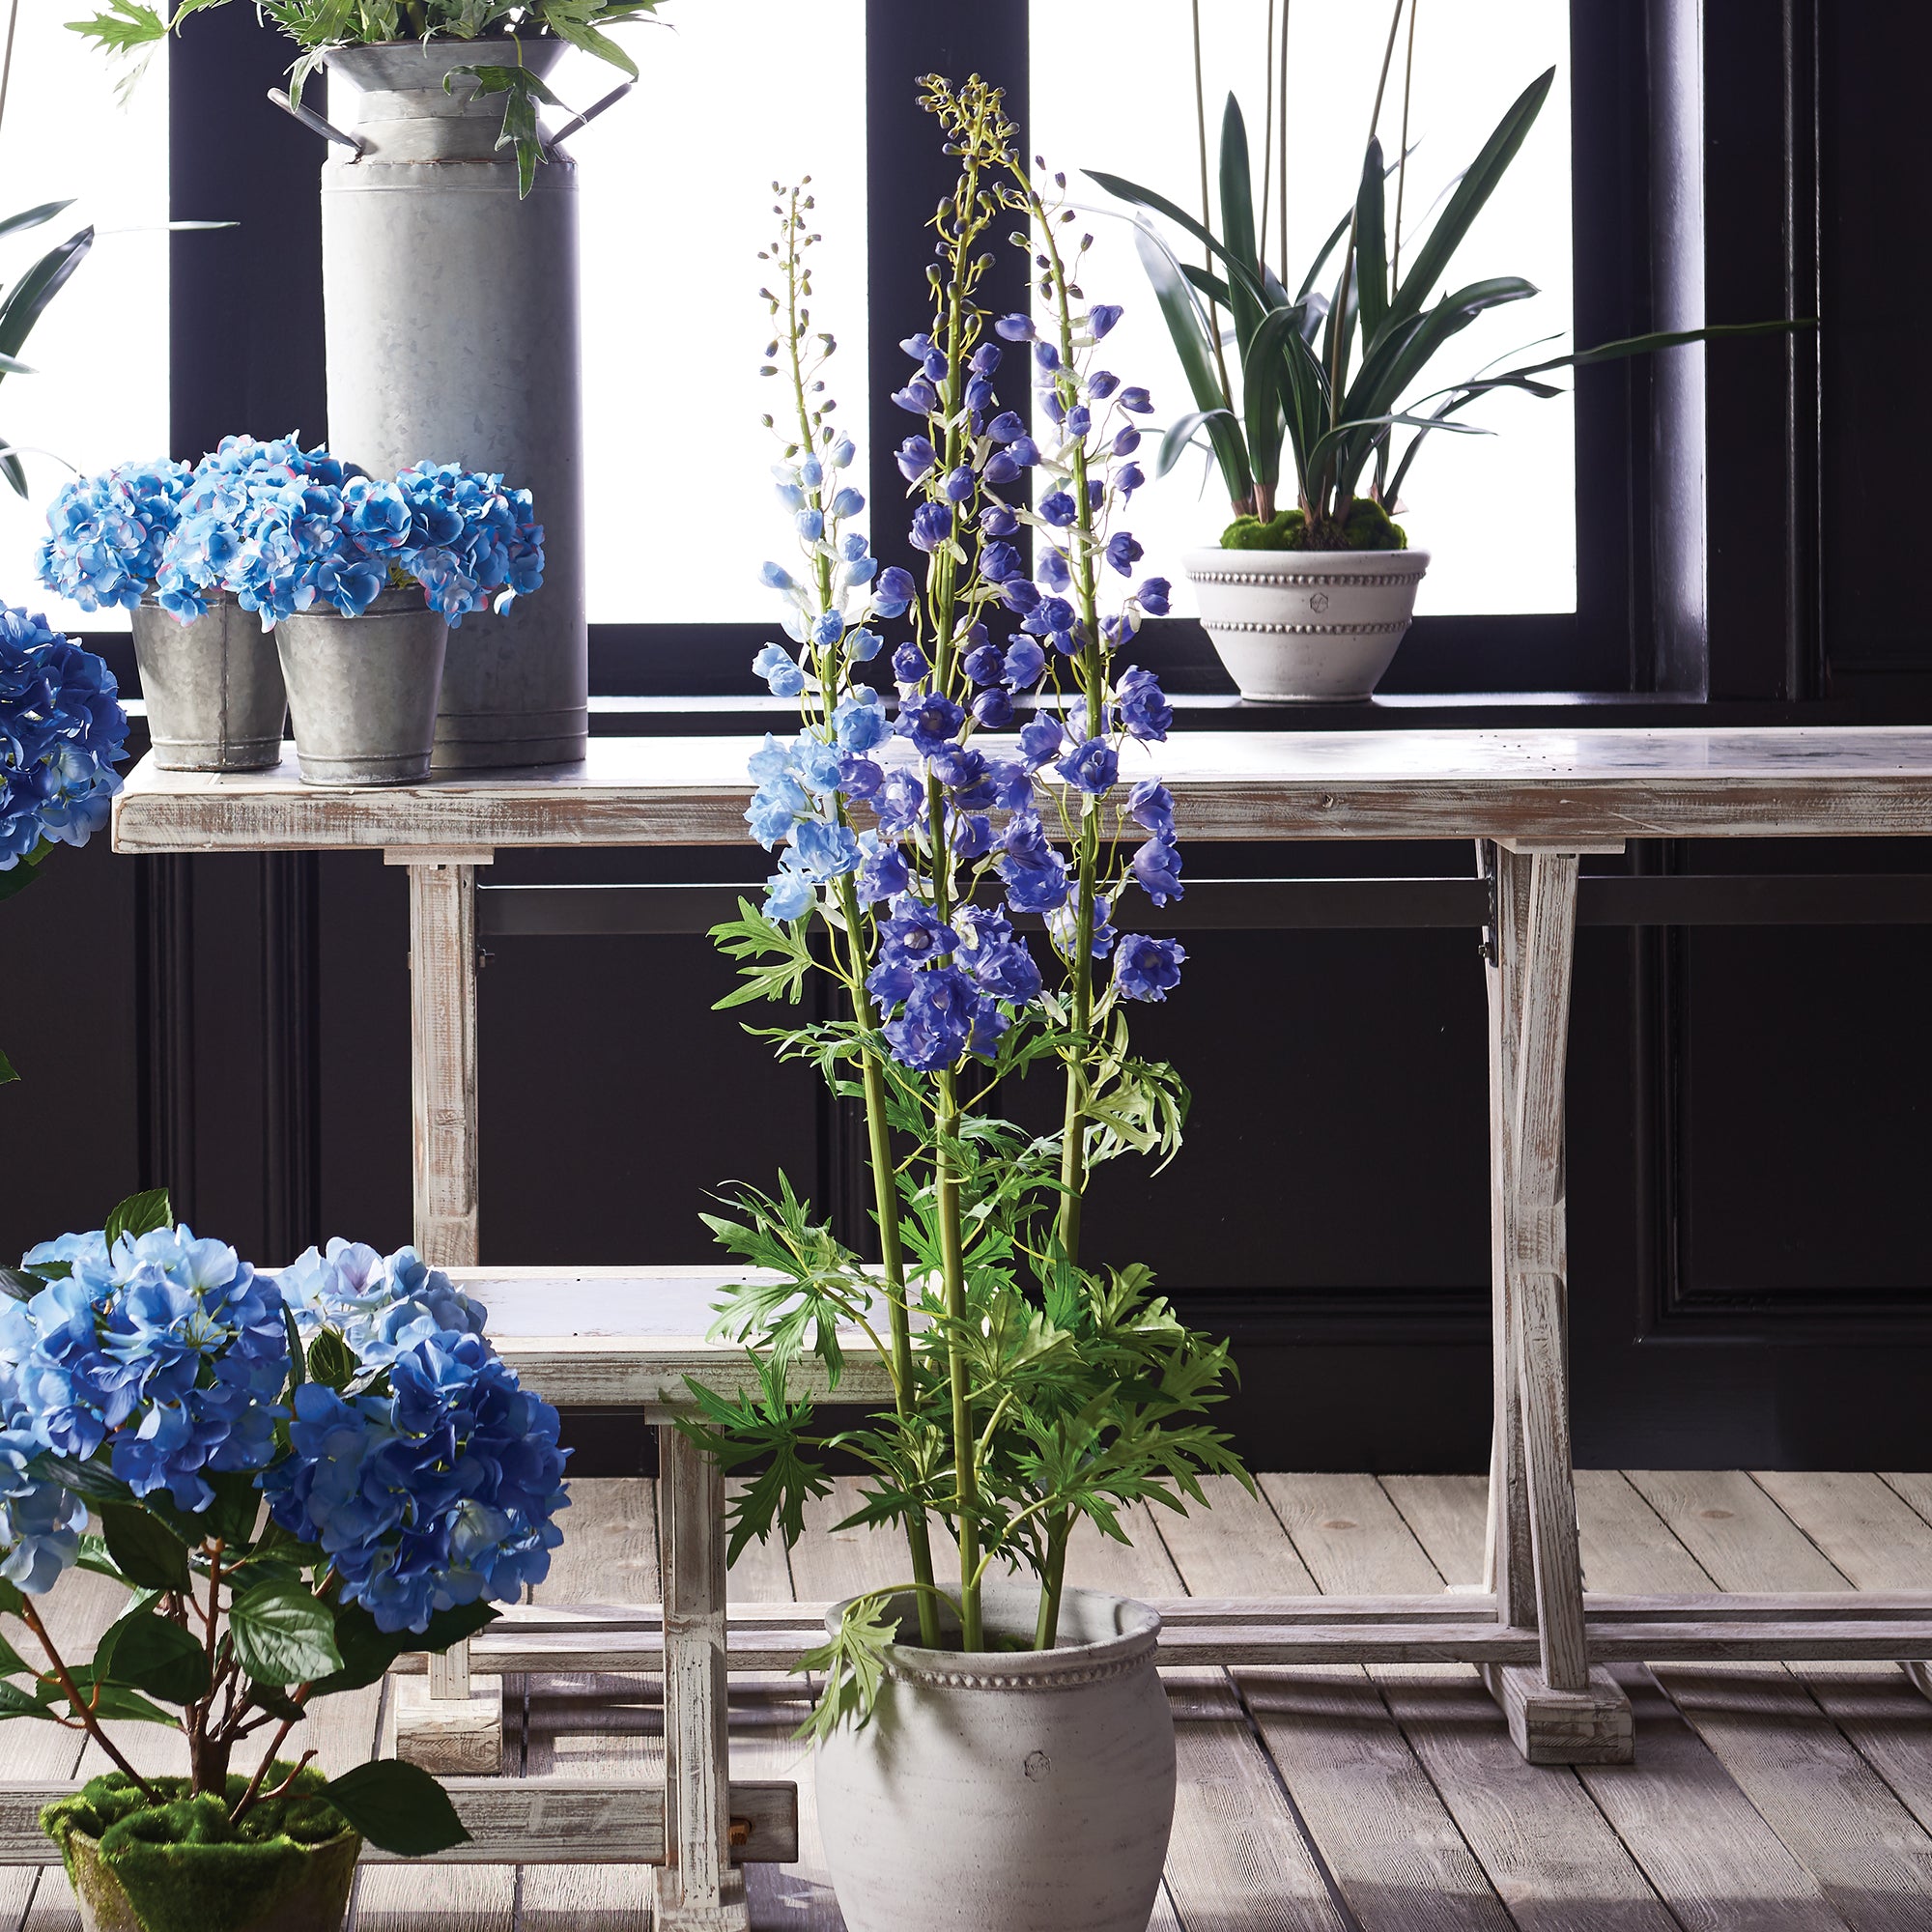 Florals are an essential design element. If done right, they can make all the difference. These potted Delphiniums add height and soothing pop of violet to any space. Amethyst Home provides interior design, new construction, custom furniture, and area rugs in the Park City metro area.